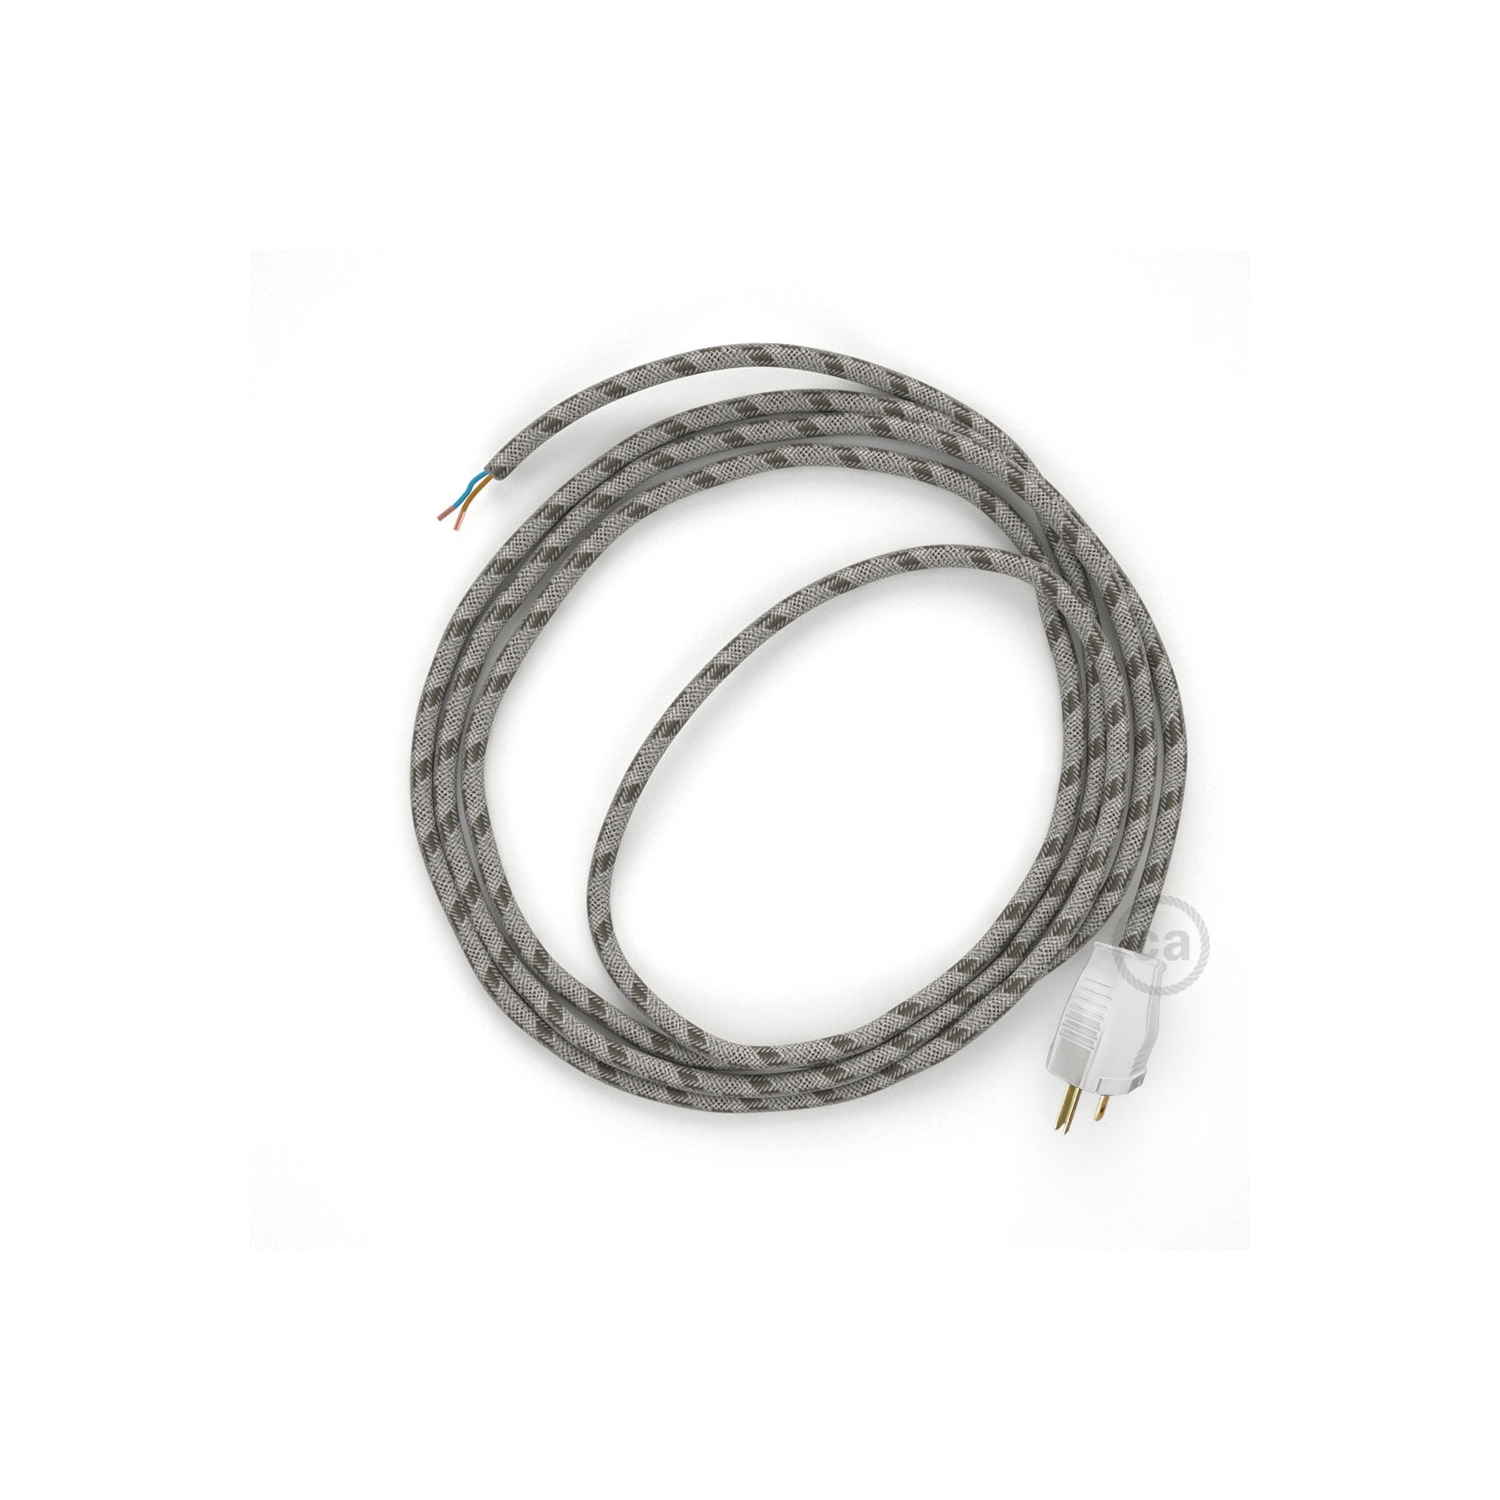 Cord-set - RD53 Natural & Brown Linen Stripe Covered Round Cable